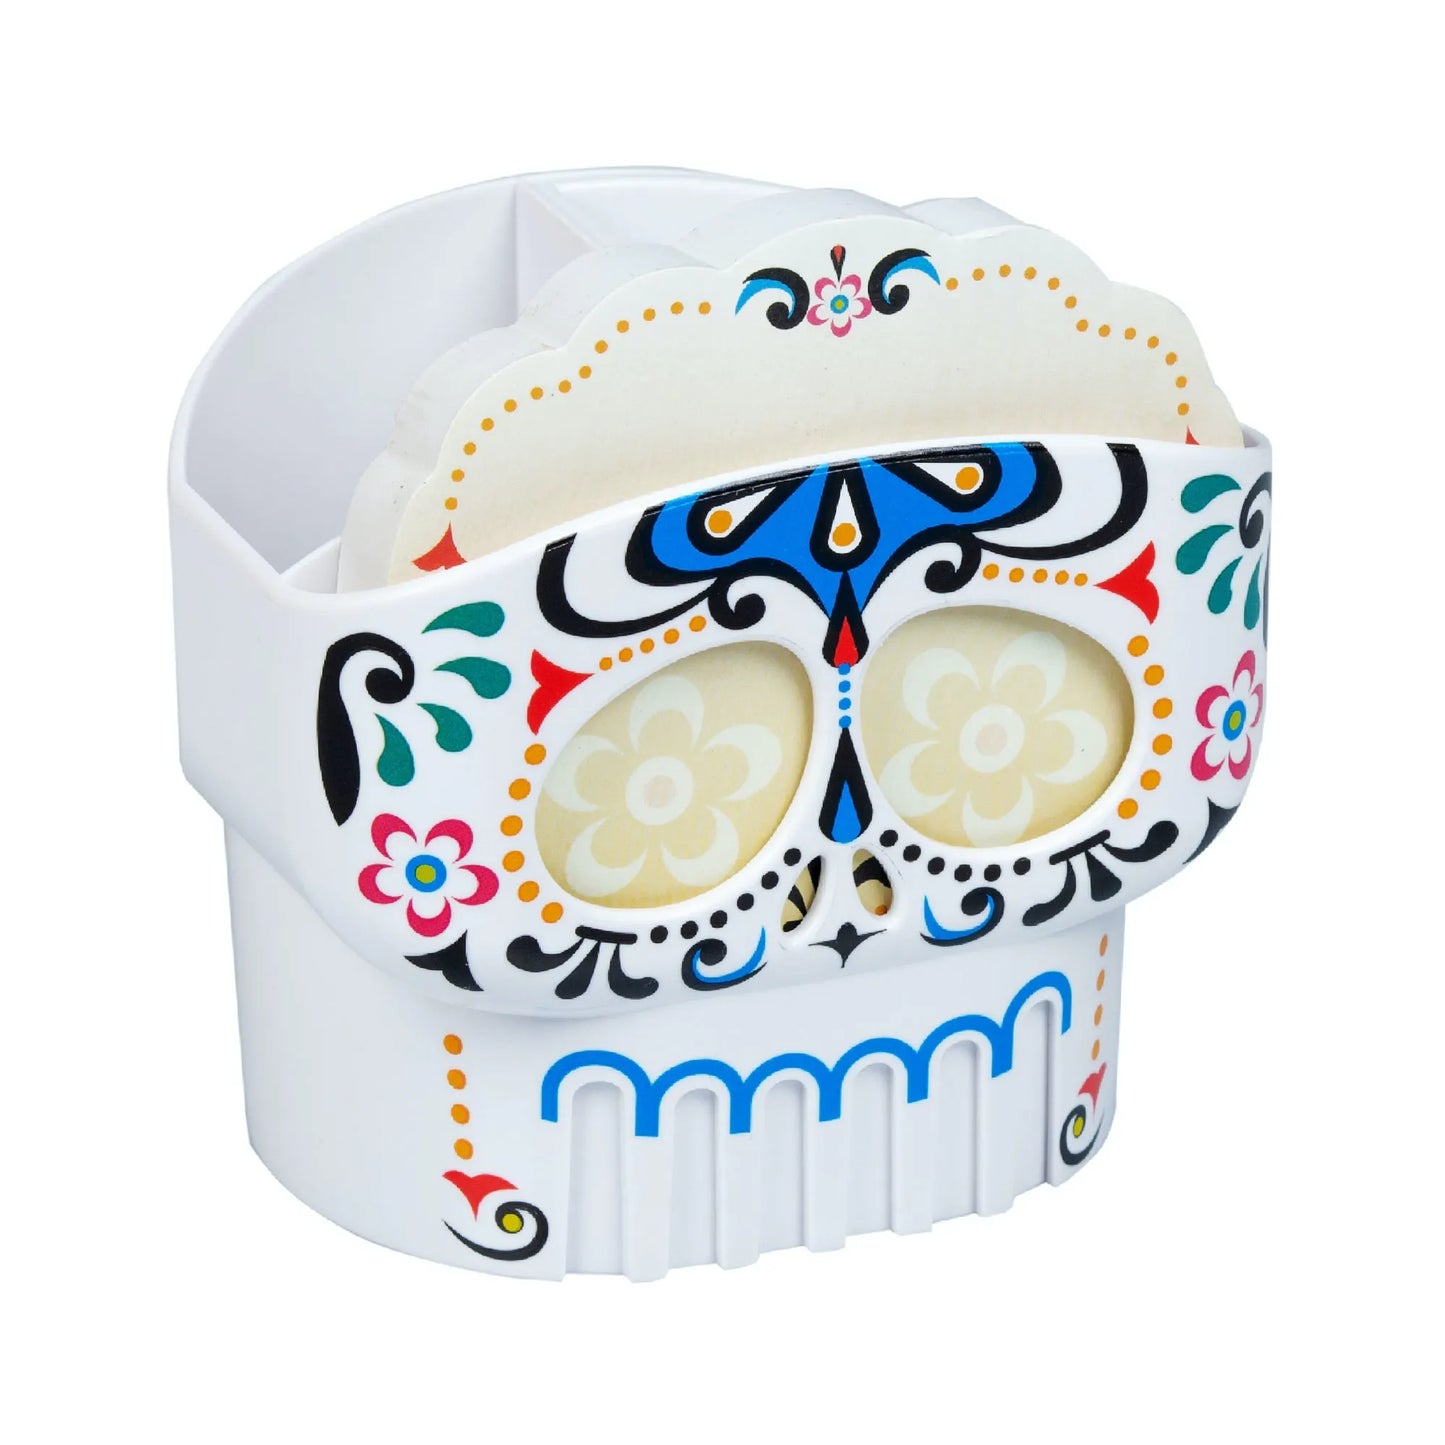 Numskull Day of the Dead Desk Organiser and Sticky Notes Set